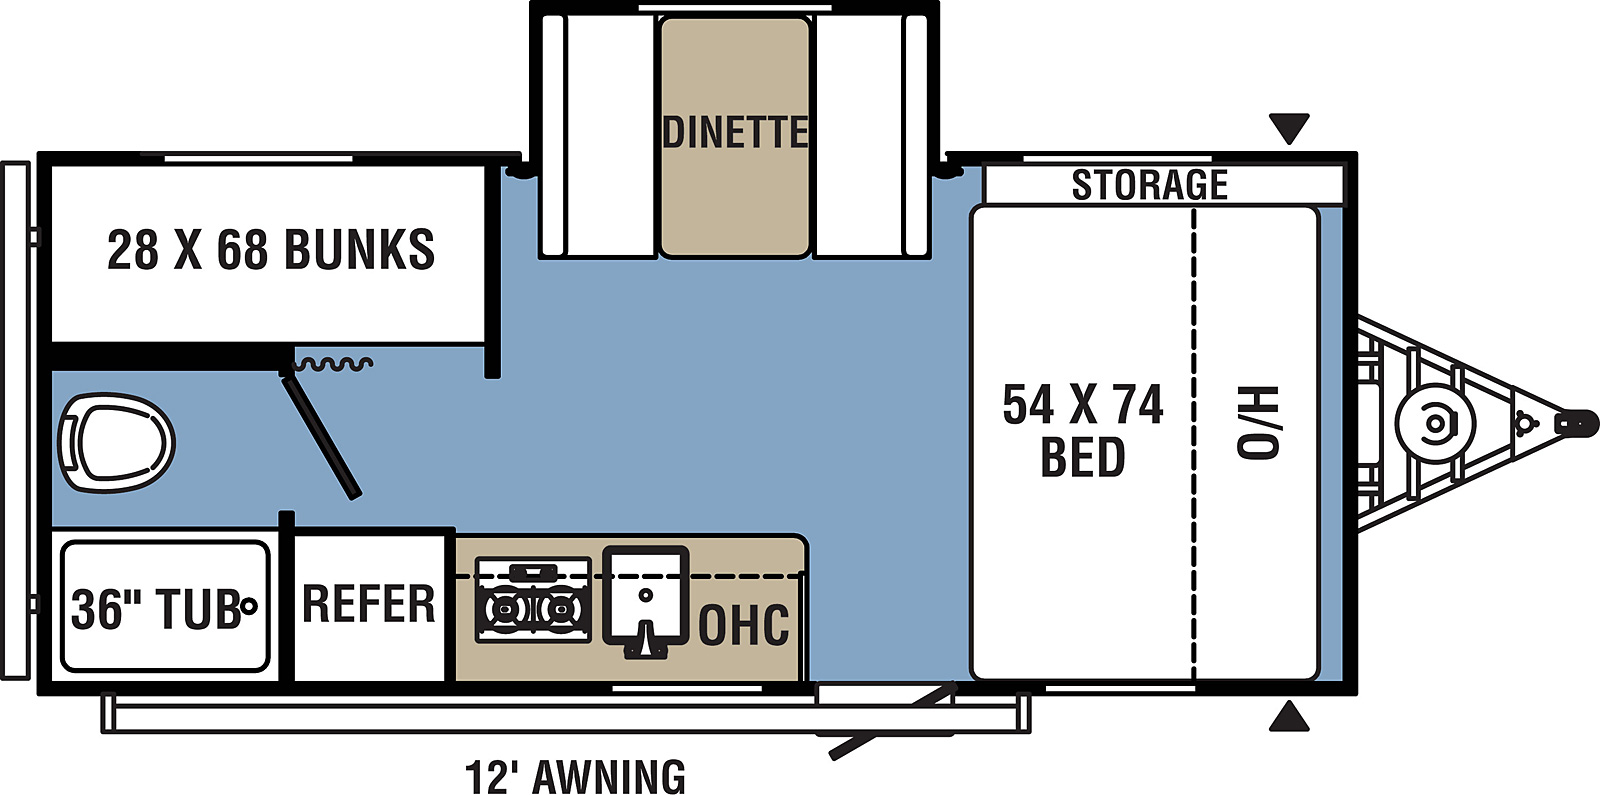 Clipper Ultra-Lite 17BHS floorplan. The 17BHS has one slide out and one entry door.